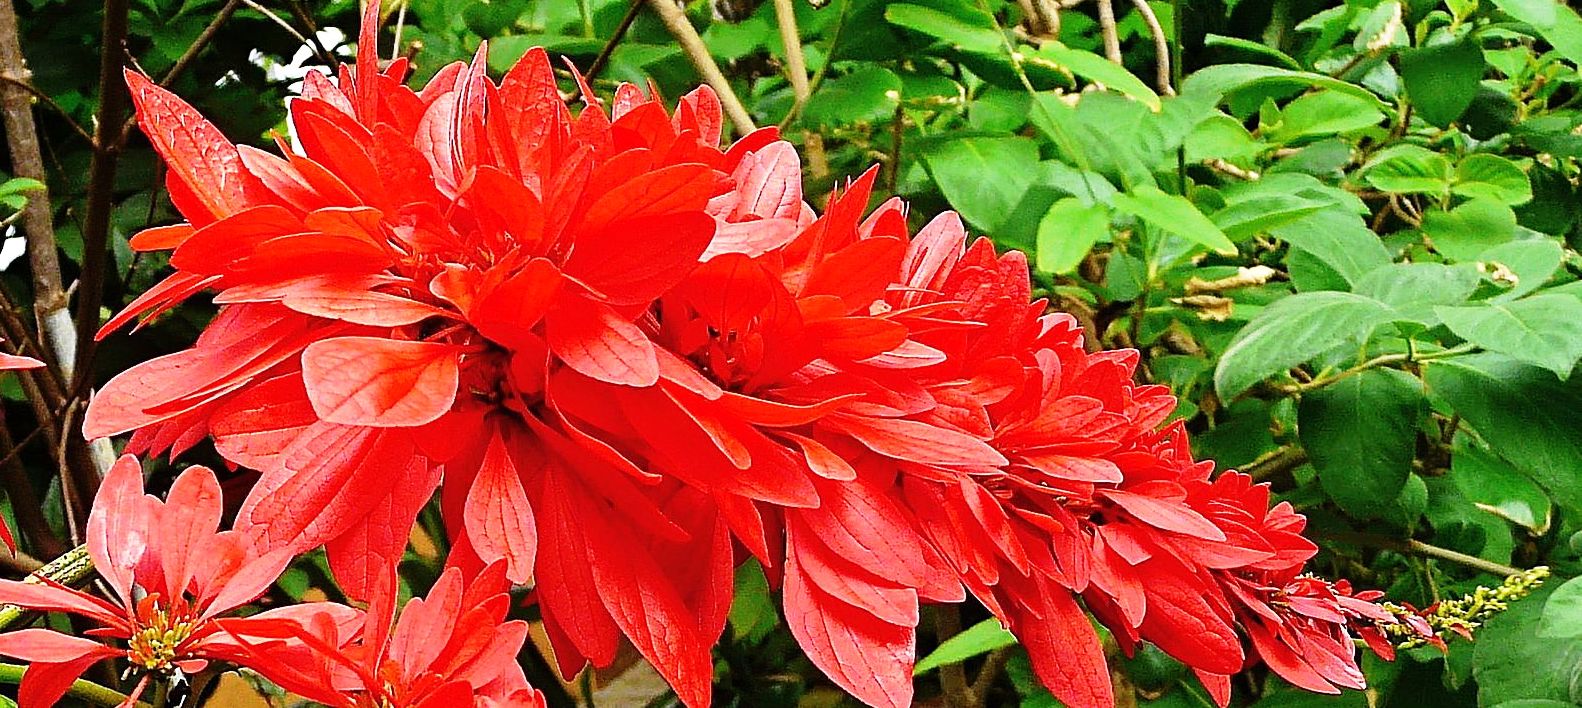 National Flower of Trinidad and Tobago